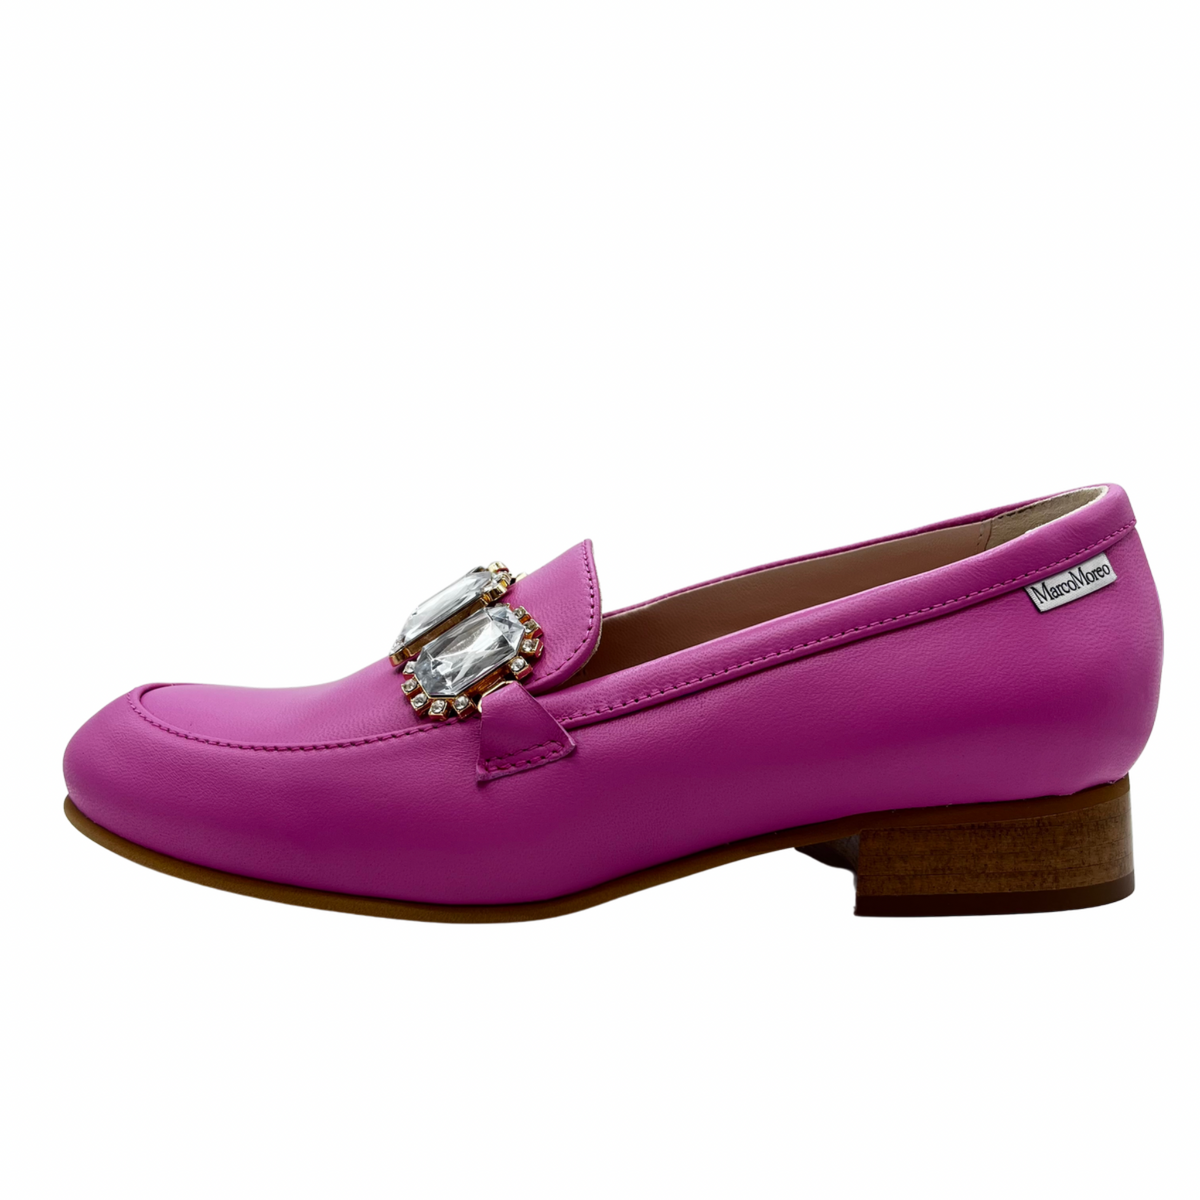 Marco Moreo Pink Leather Loafer with jewel chain